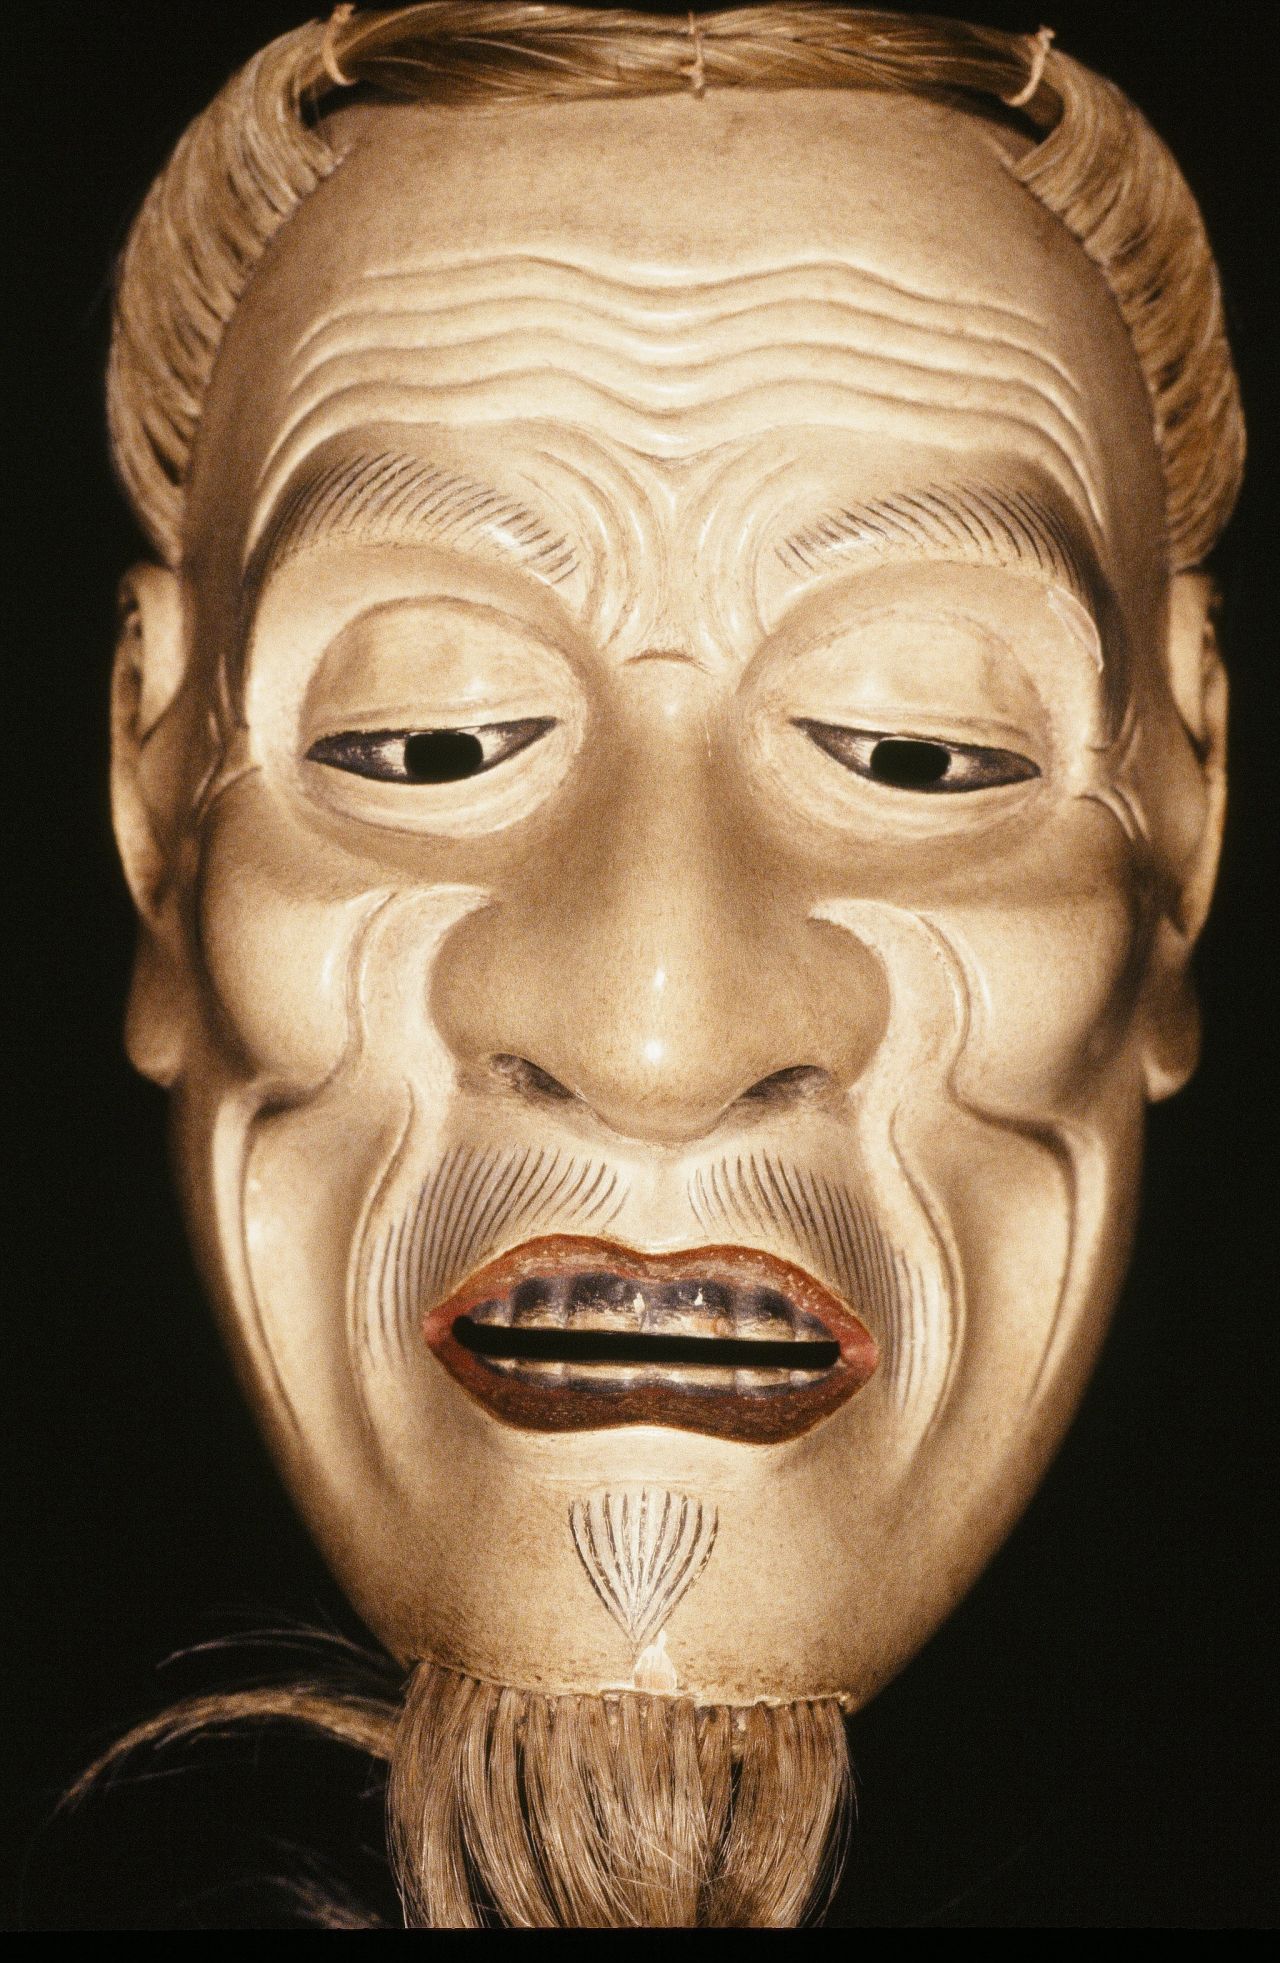 Ishiō-jō mask, pictured above, is a mask of old man often used for the role of deity